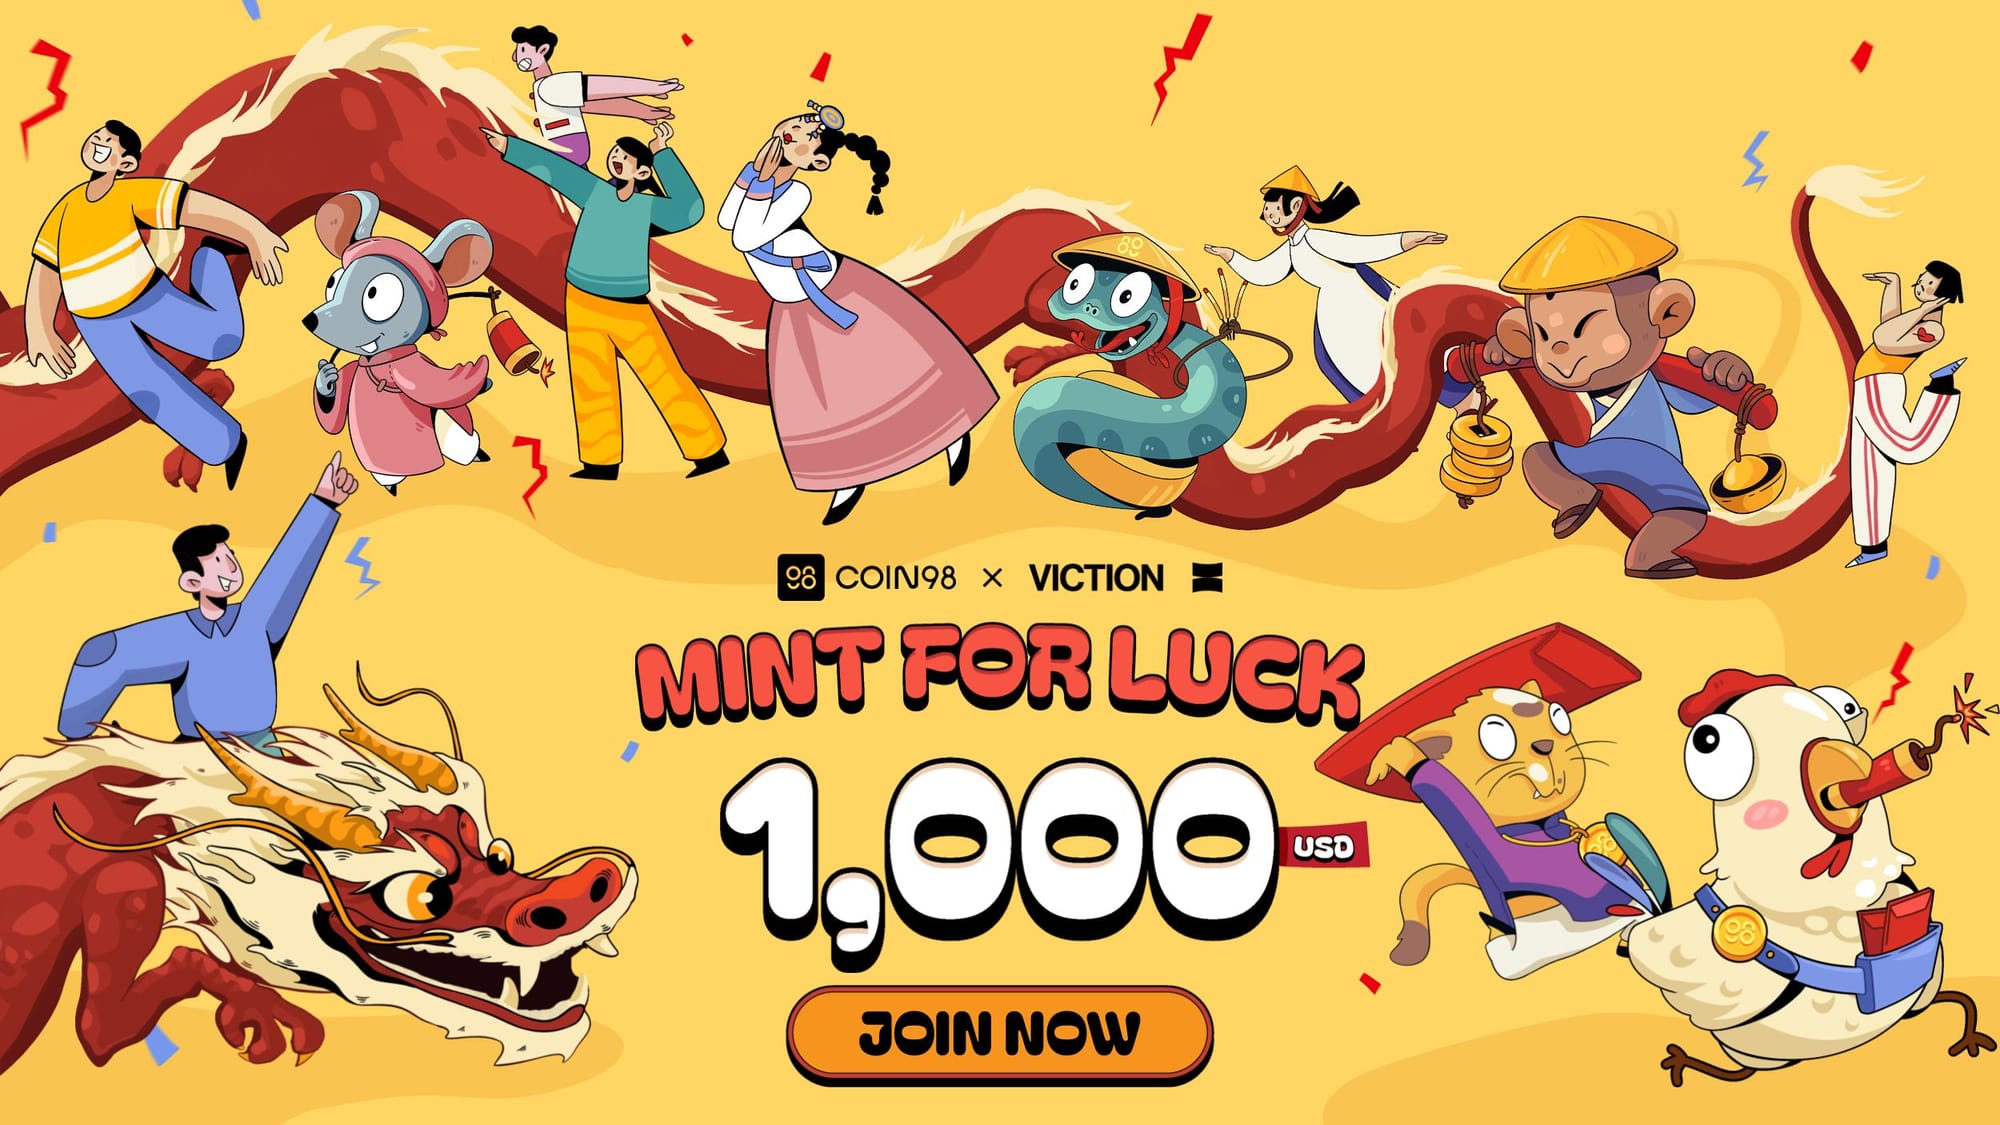 Multichain of Luck - Coin98 x Viction: Mint for Luck